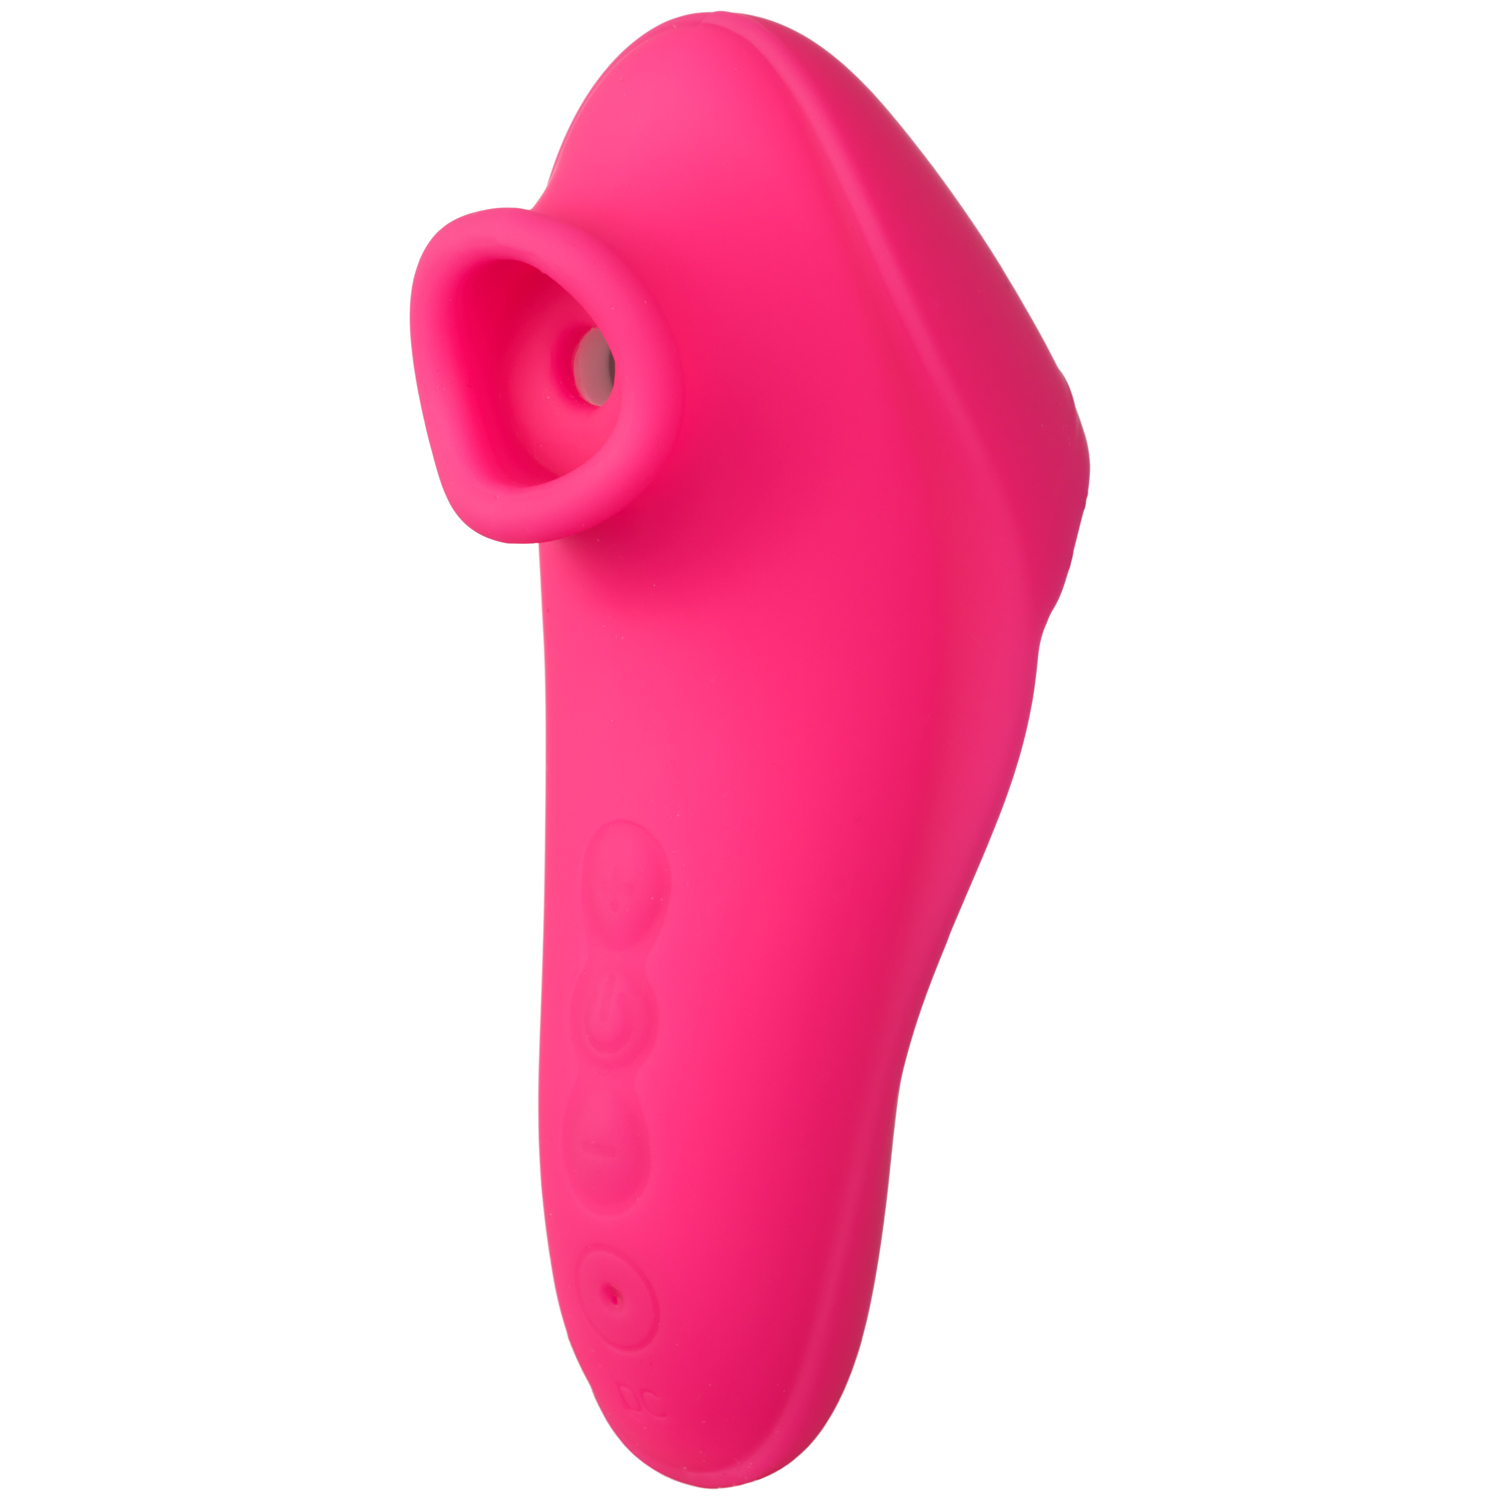 Tracy&apos;s Dog Mage Suction Finger Vibrator - Pink